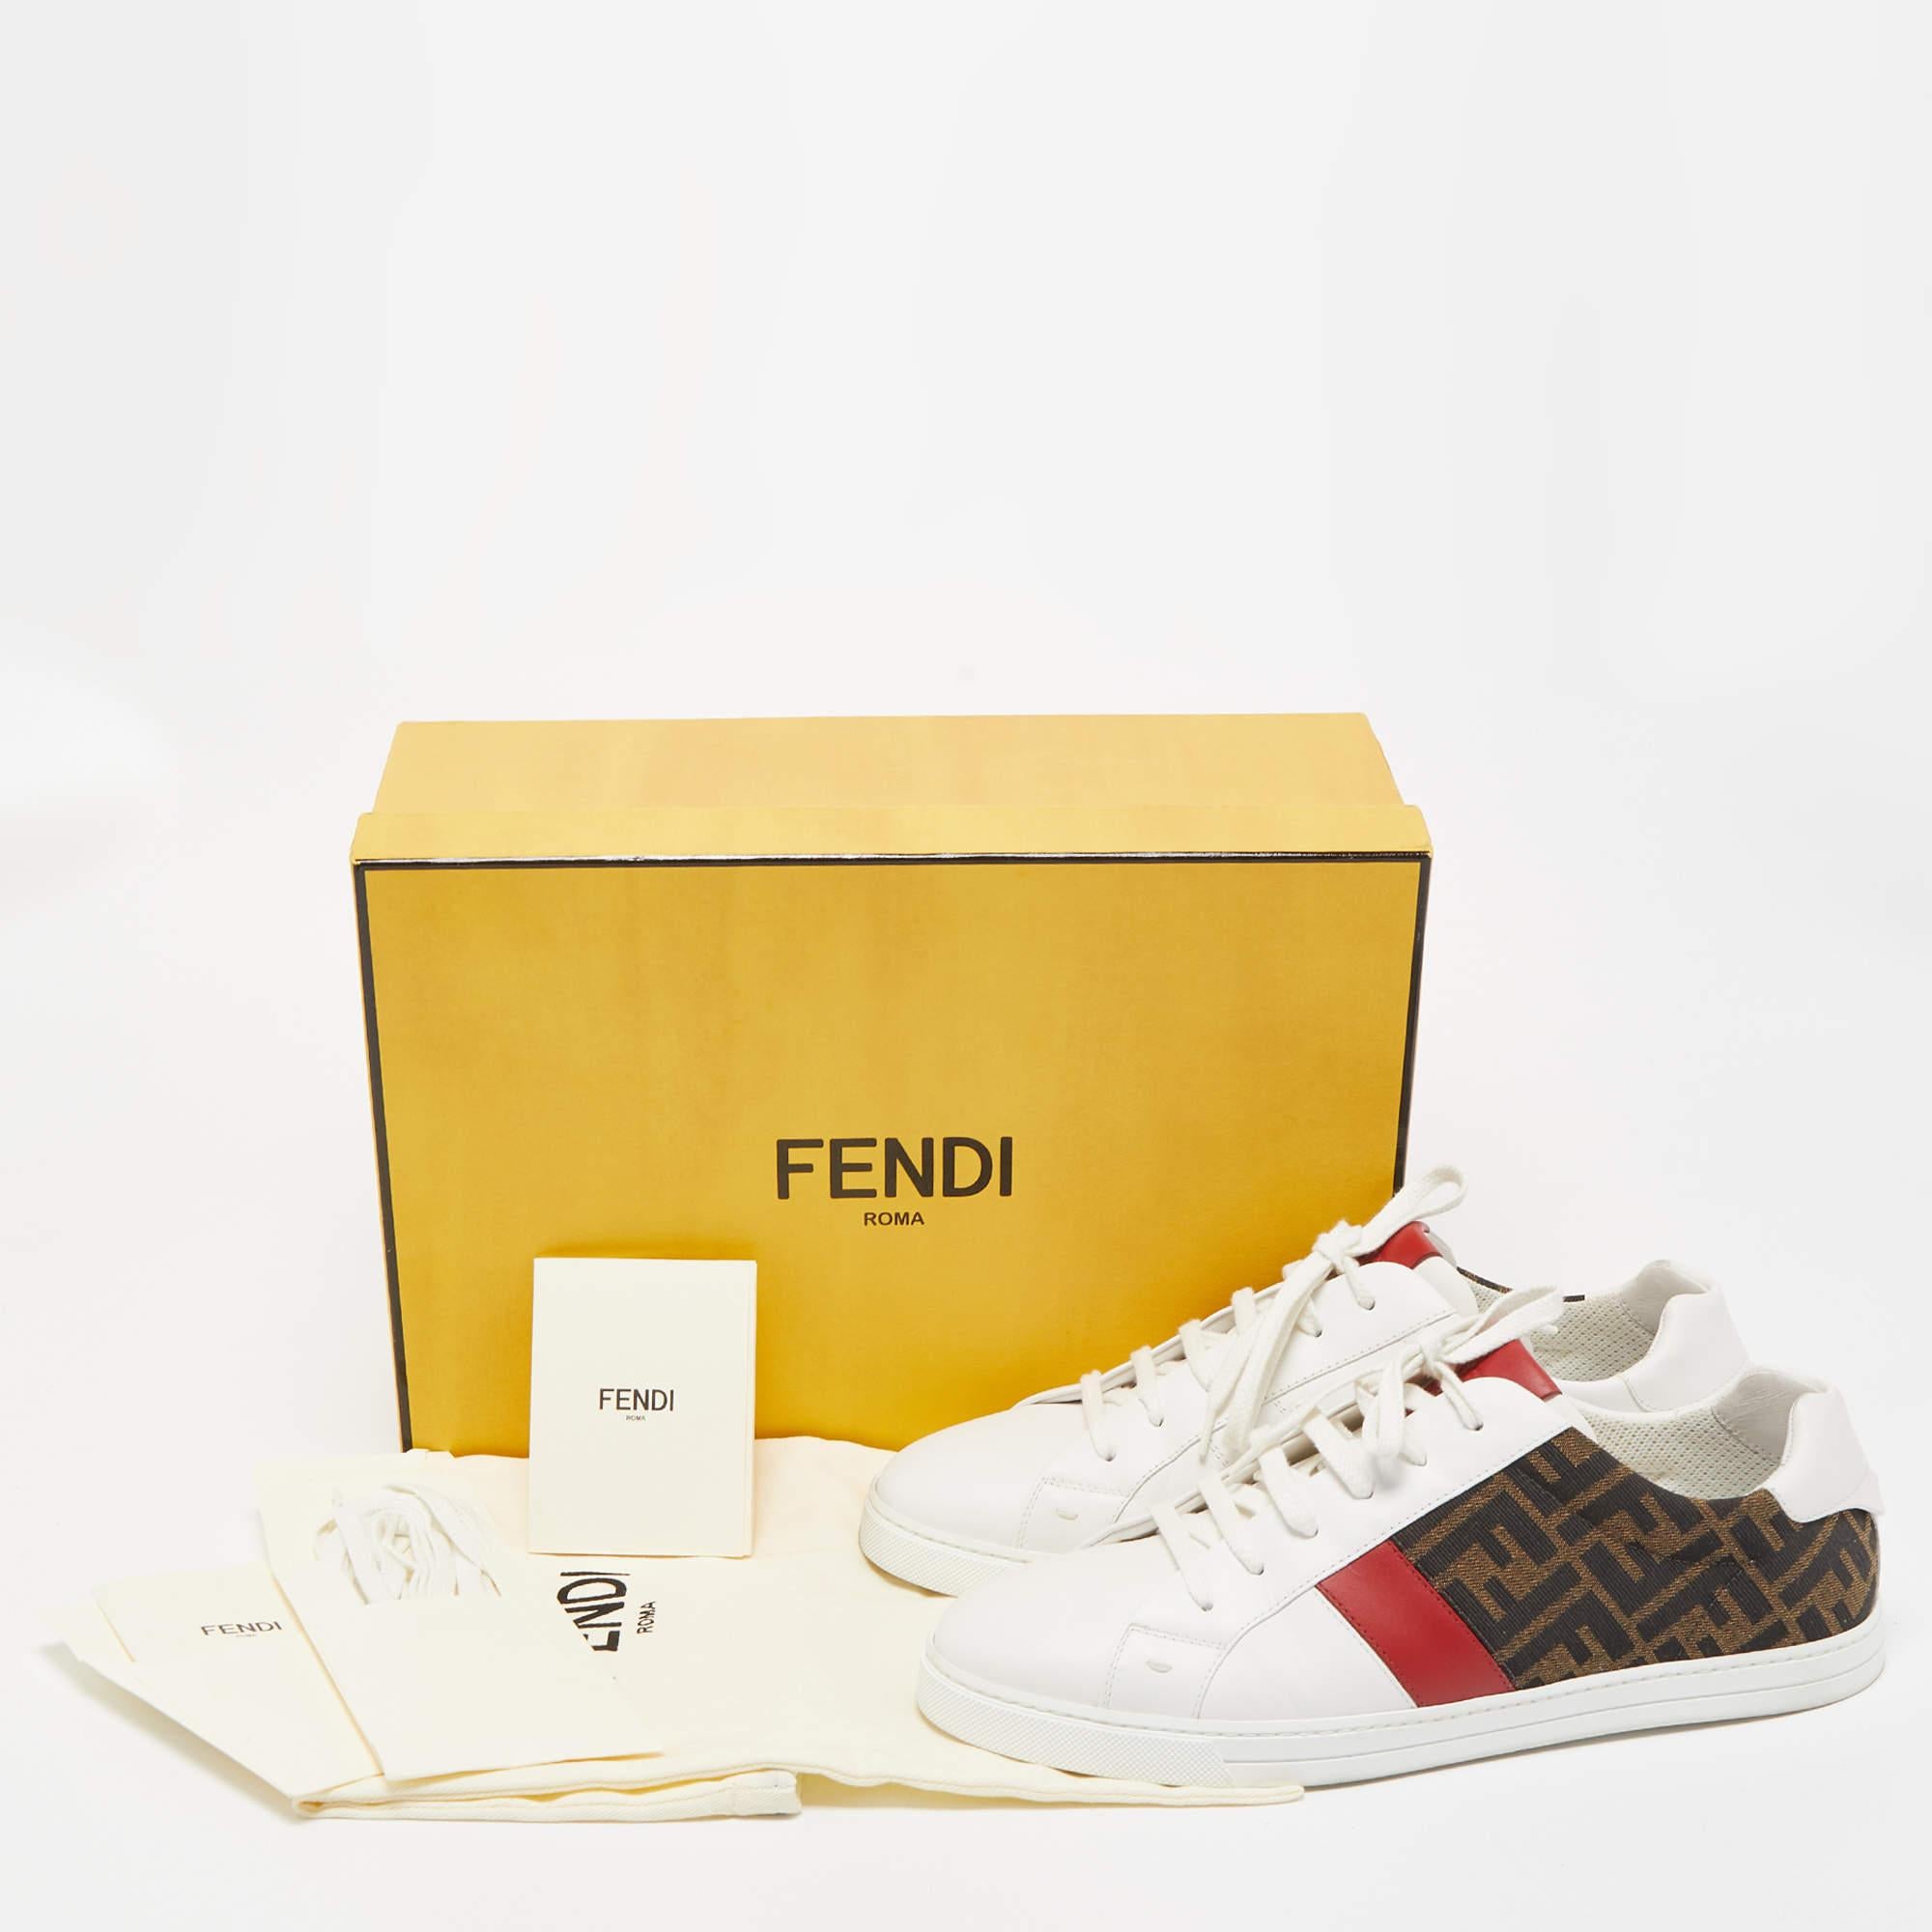 Fendi Tricolour Leather and FF Canvas Low Top Sneakers Size 42 5